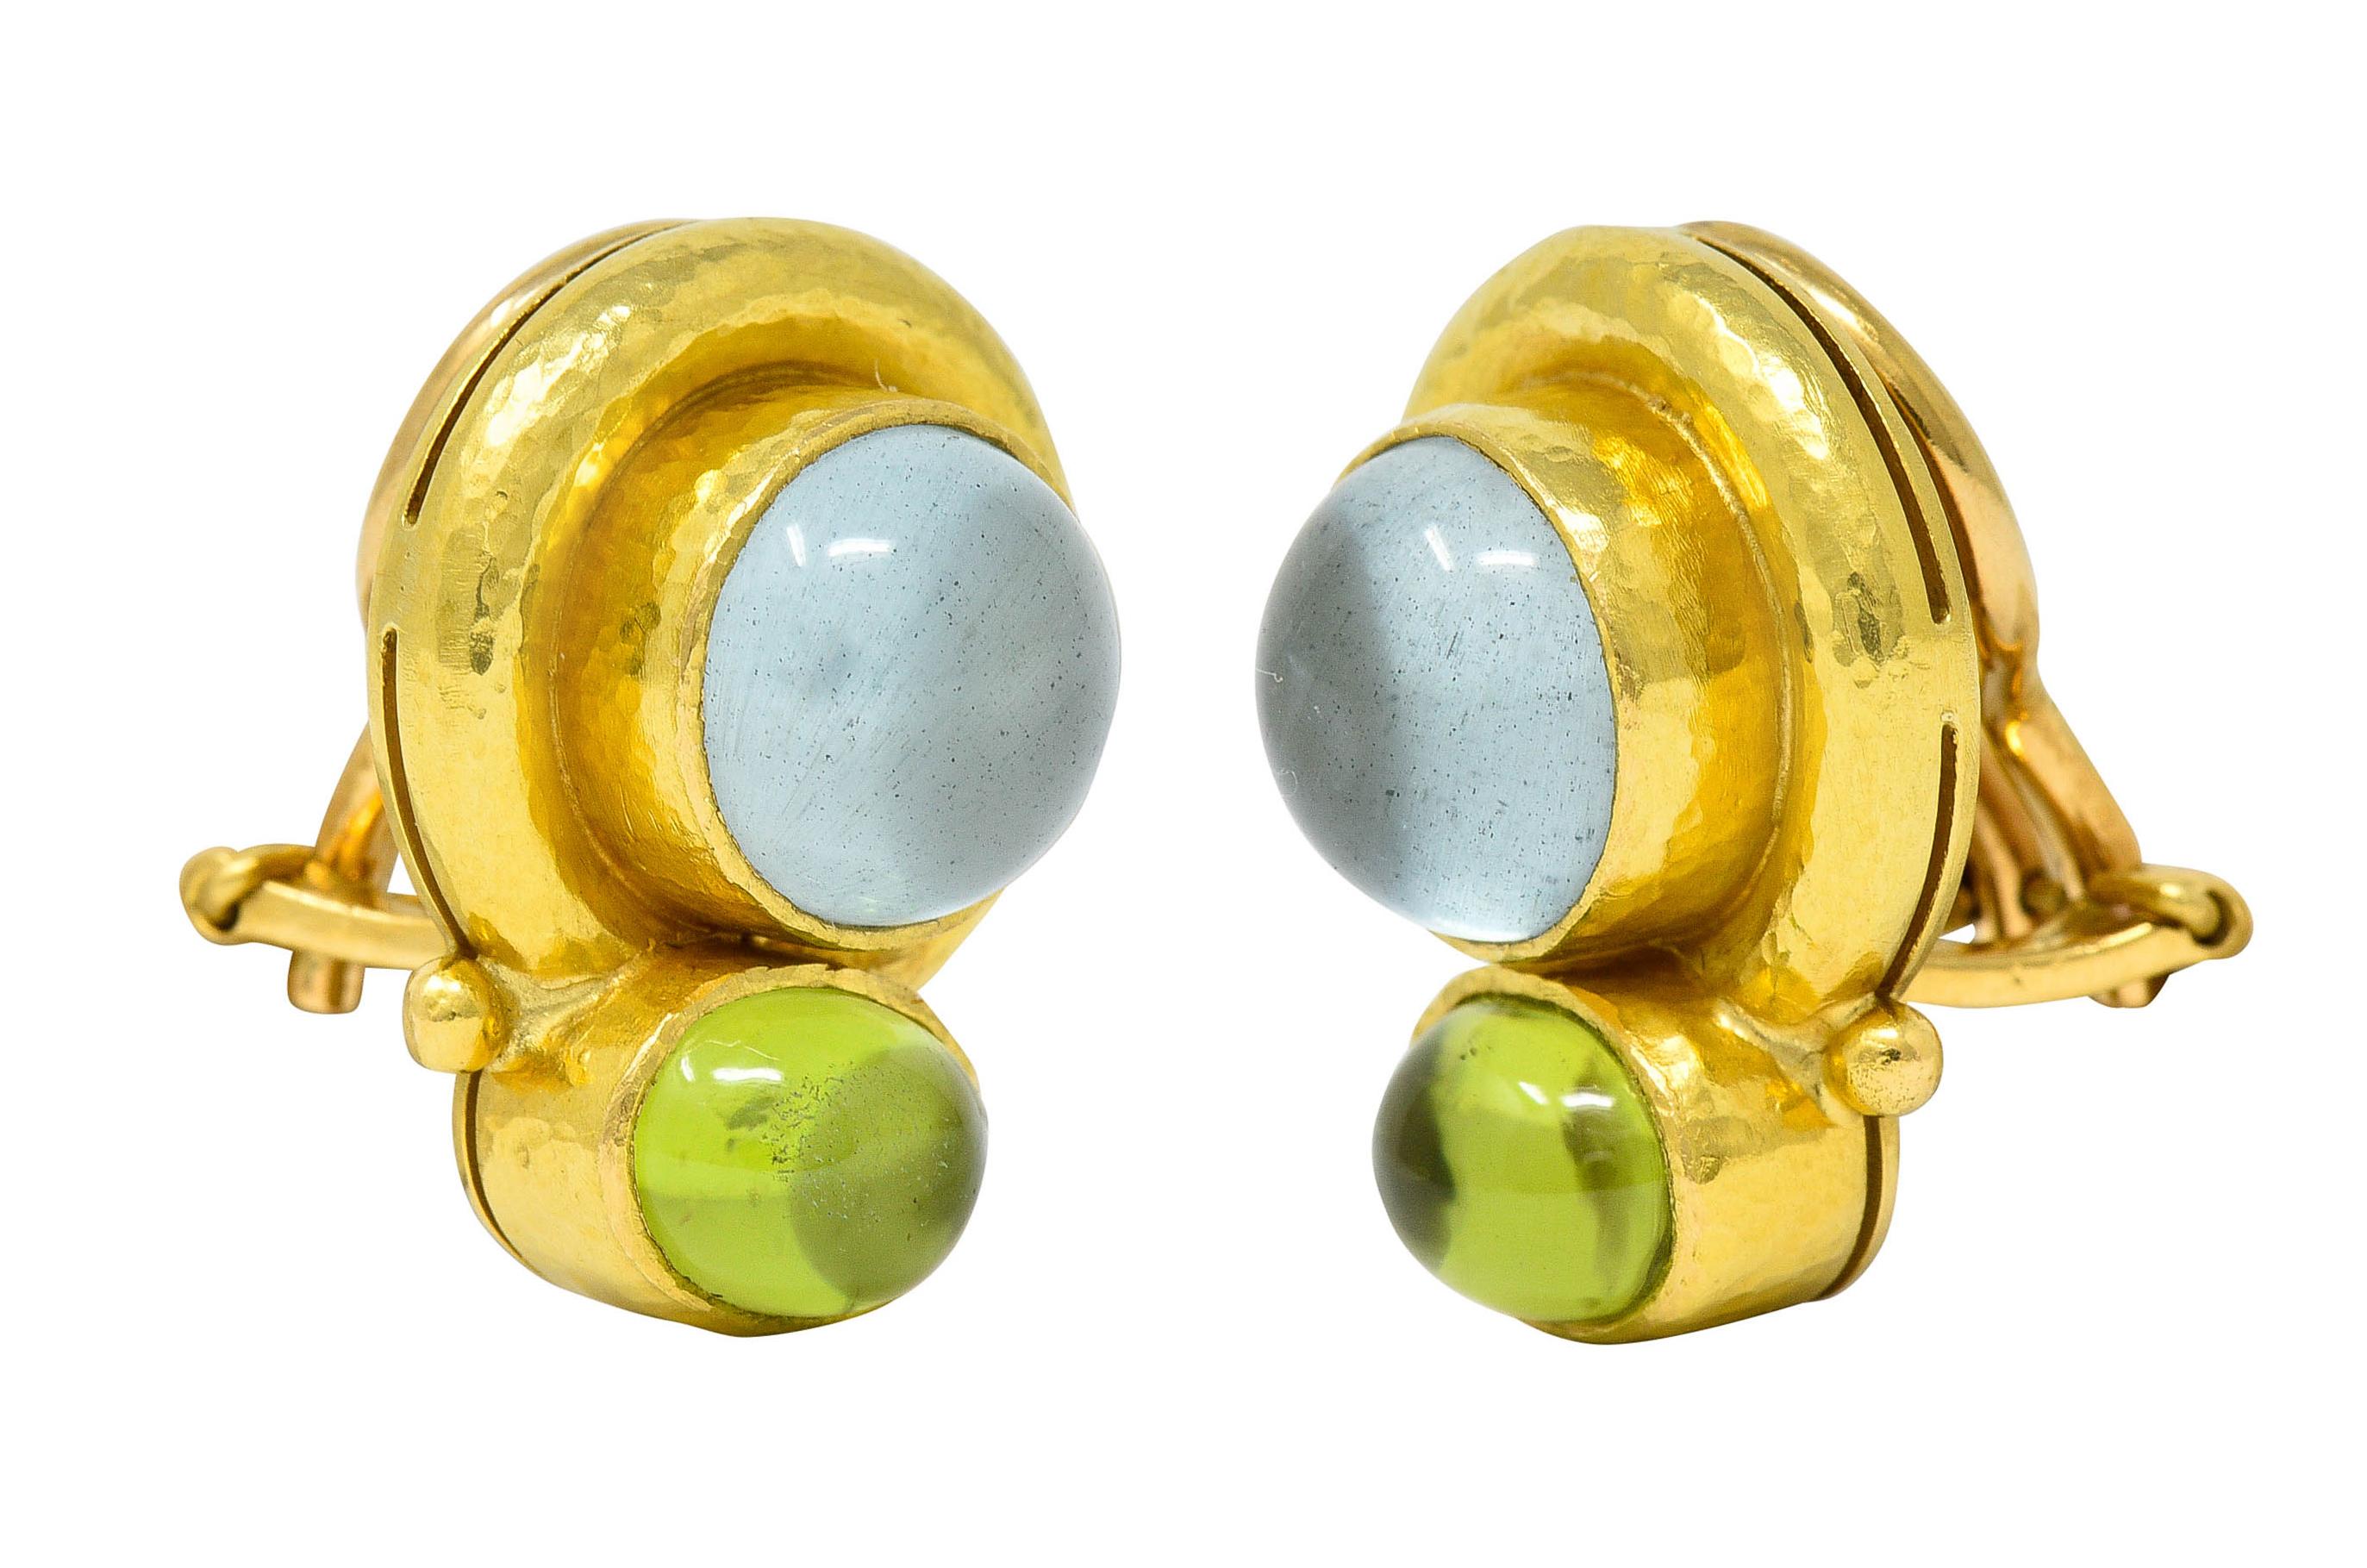 Earrings are designed as two gemstone cabochons - bezel set in hammered gold surrounds

Featuring 9.0 mm round labradorite backed by white mother-of-pearl

Semi-transparent and light gray in color with a billowing white sheen

With oval peridot